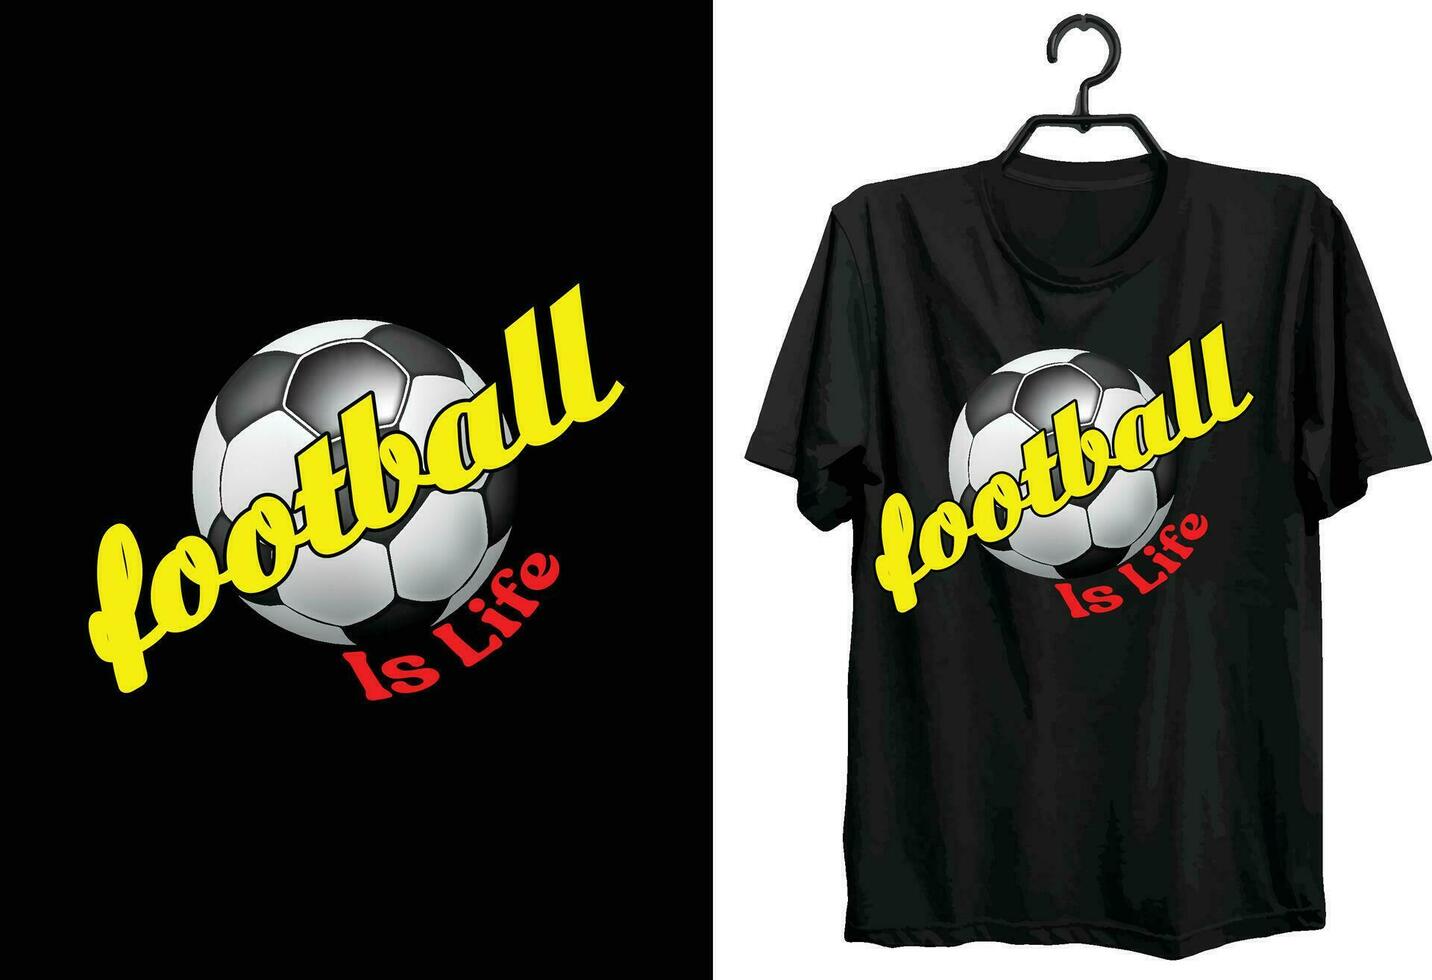 Football T-shirt conception. typographie, coutume, vecteur T-shirt conception. marrant Football T-shirt conception pour Football amoureux.